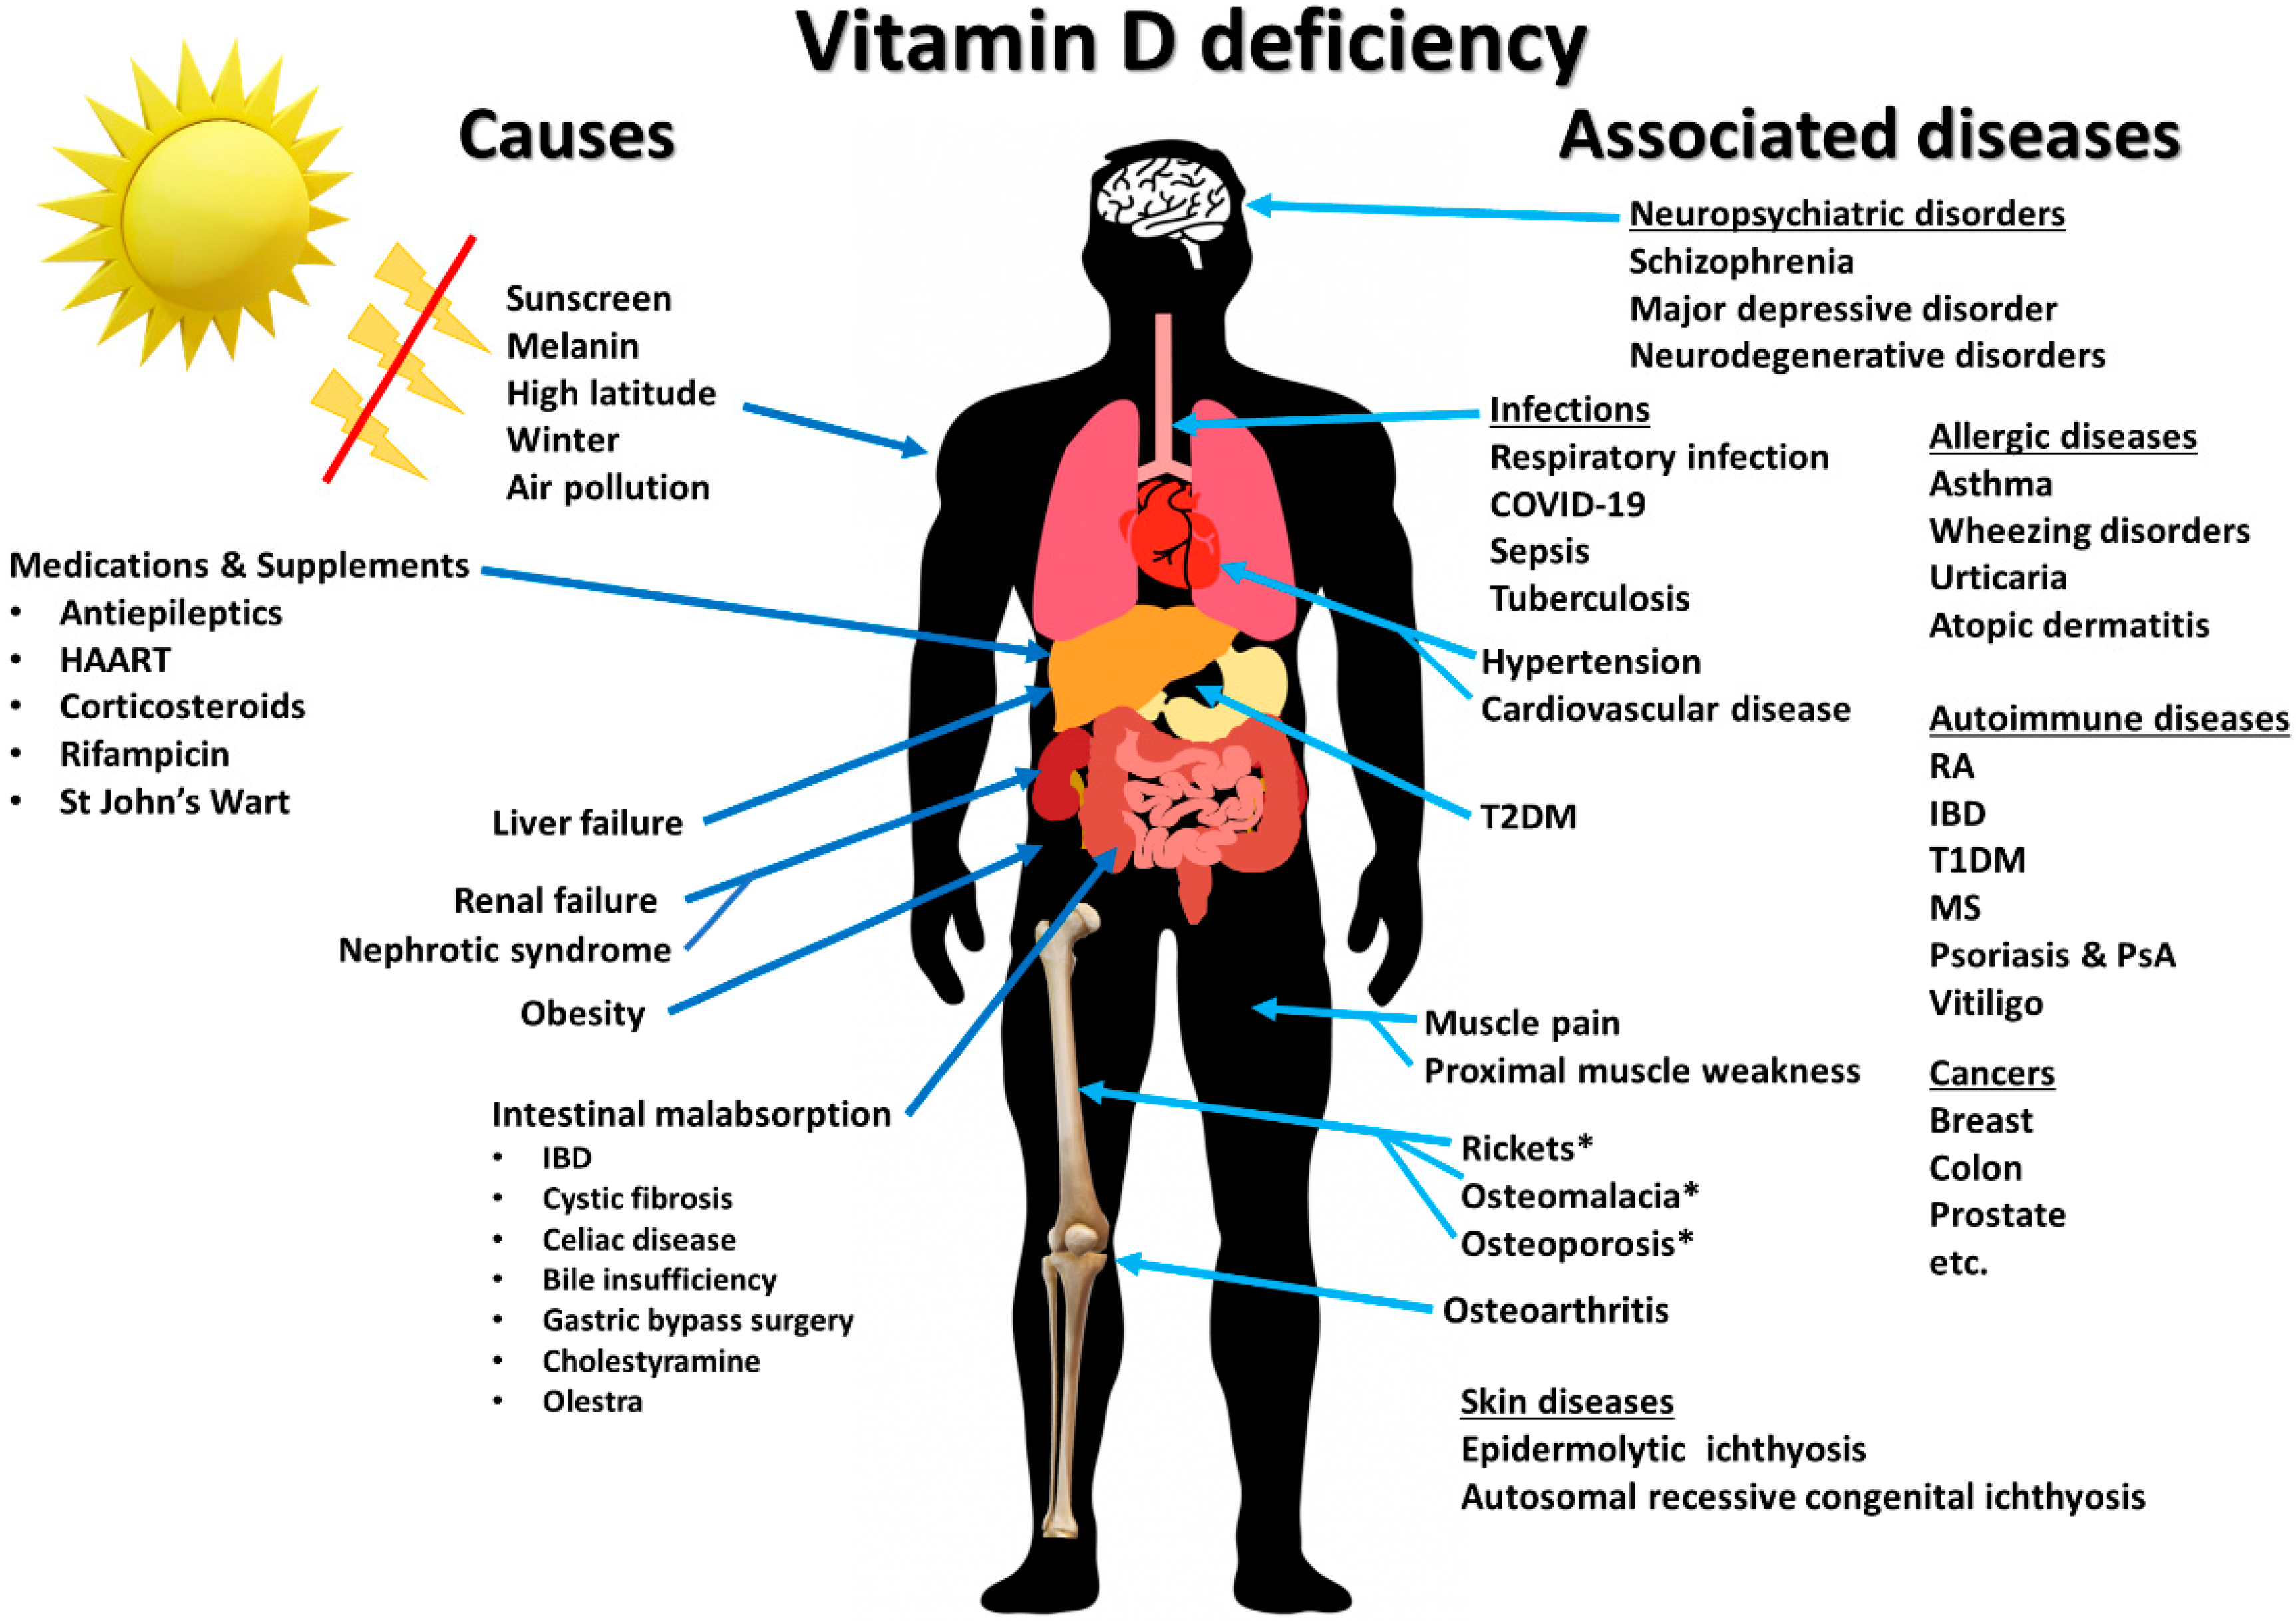 What are the neurological symptoms of vitamin D deficiency?